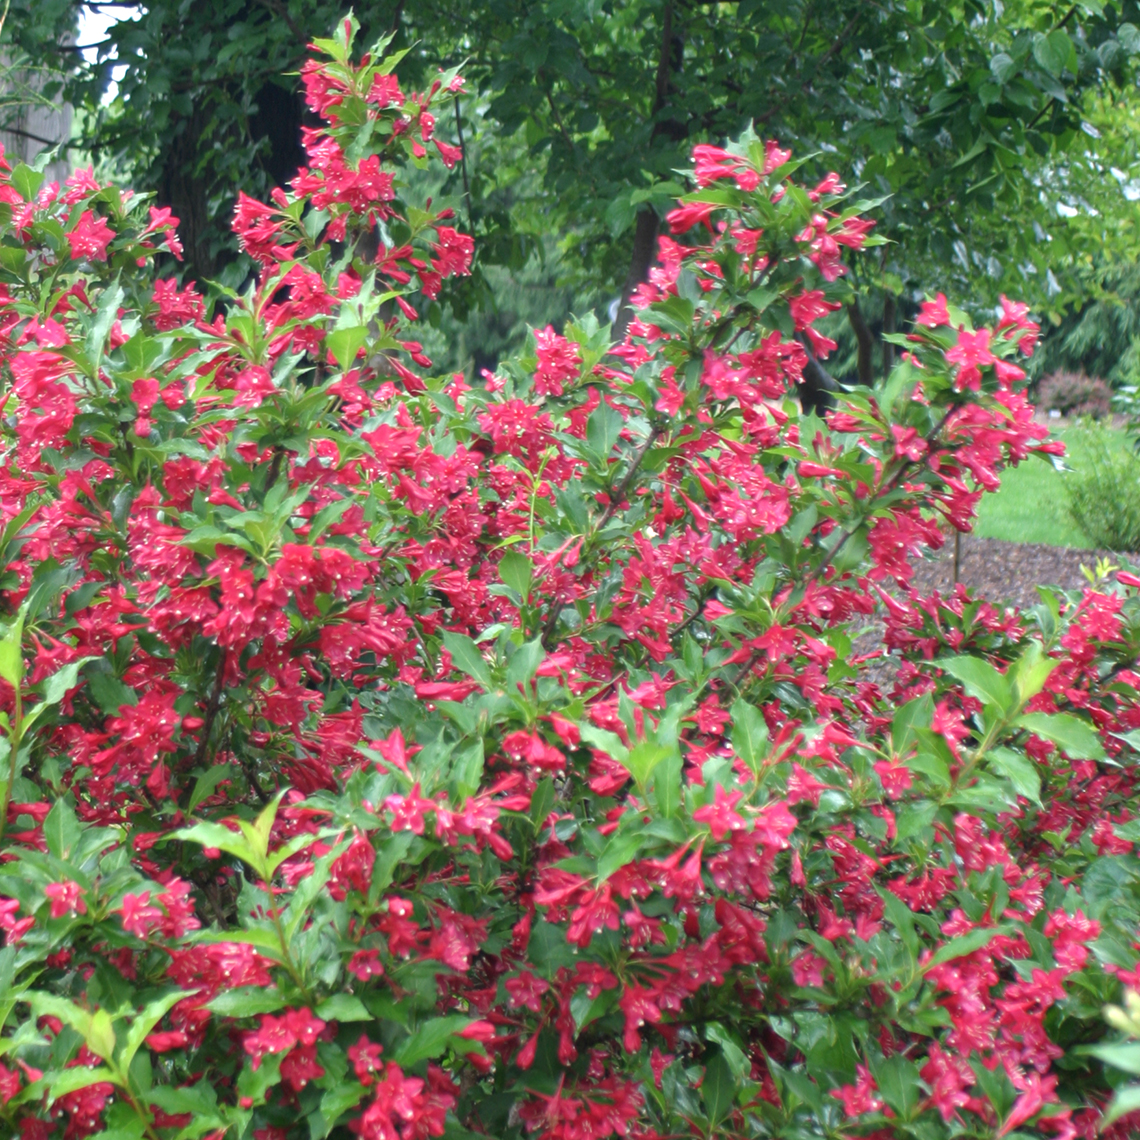 Red Prince weigela blooming in spring with red flowers